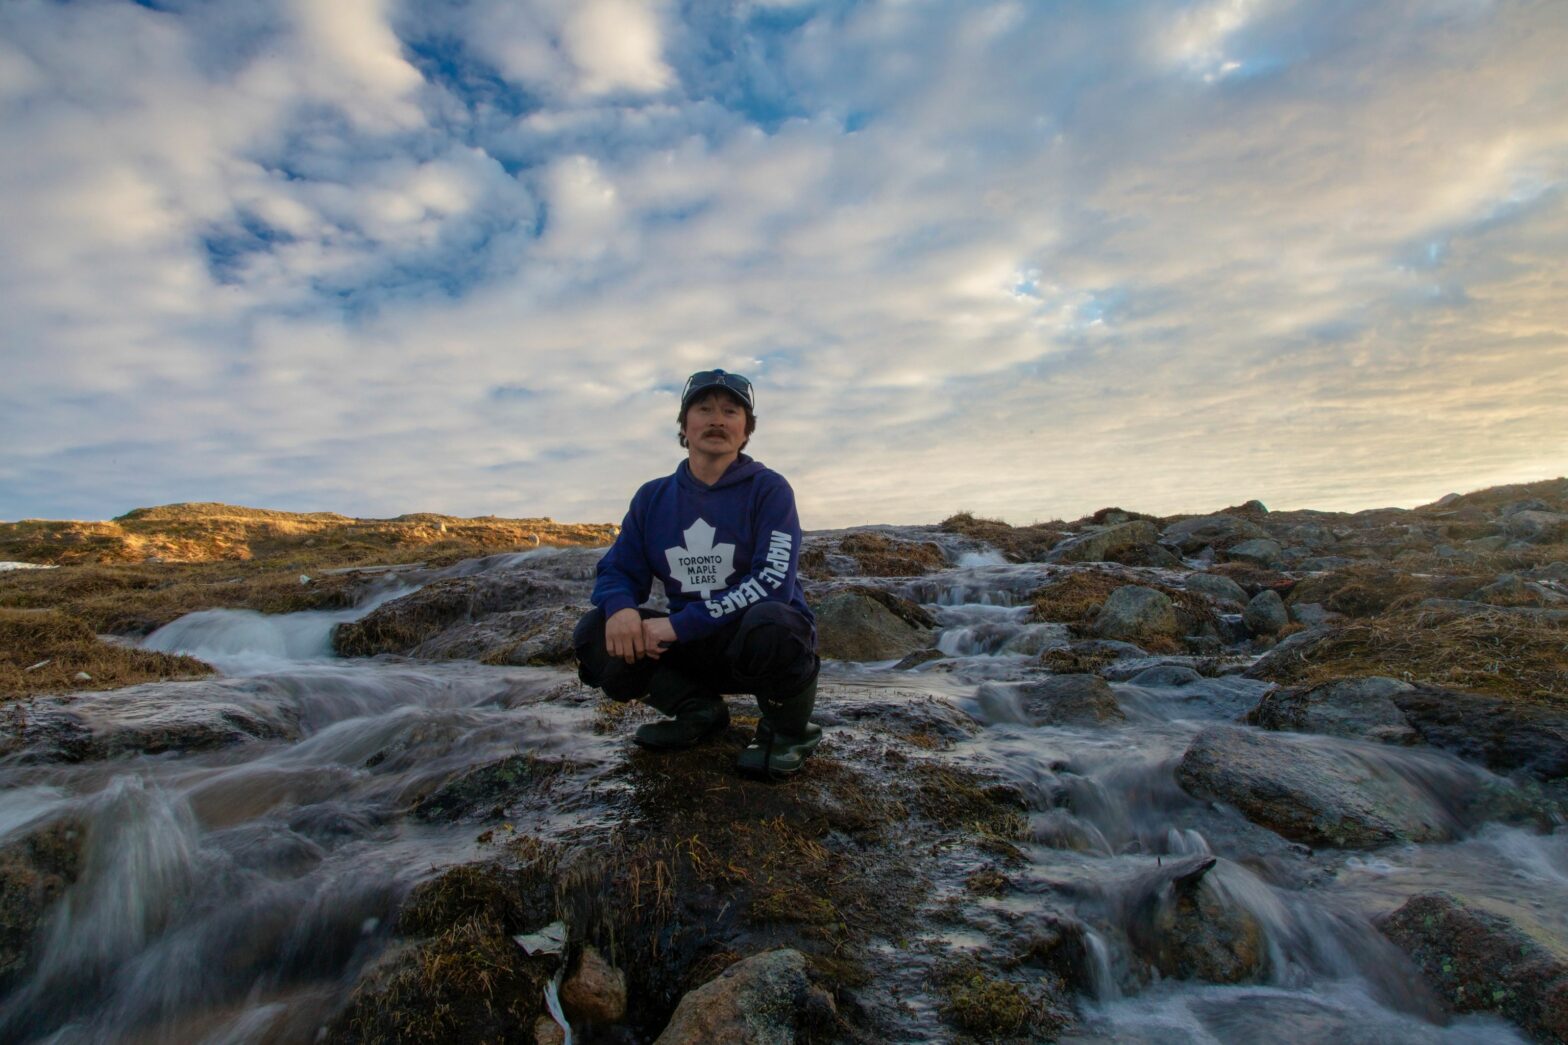 Photography “hobby” lands Nunavut man’s work in Maine museum exhibition – Eye on the Arctic